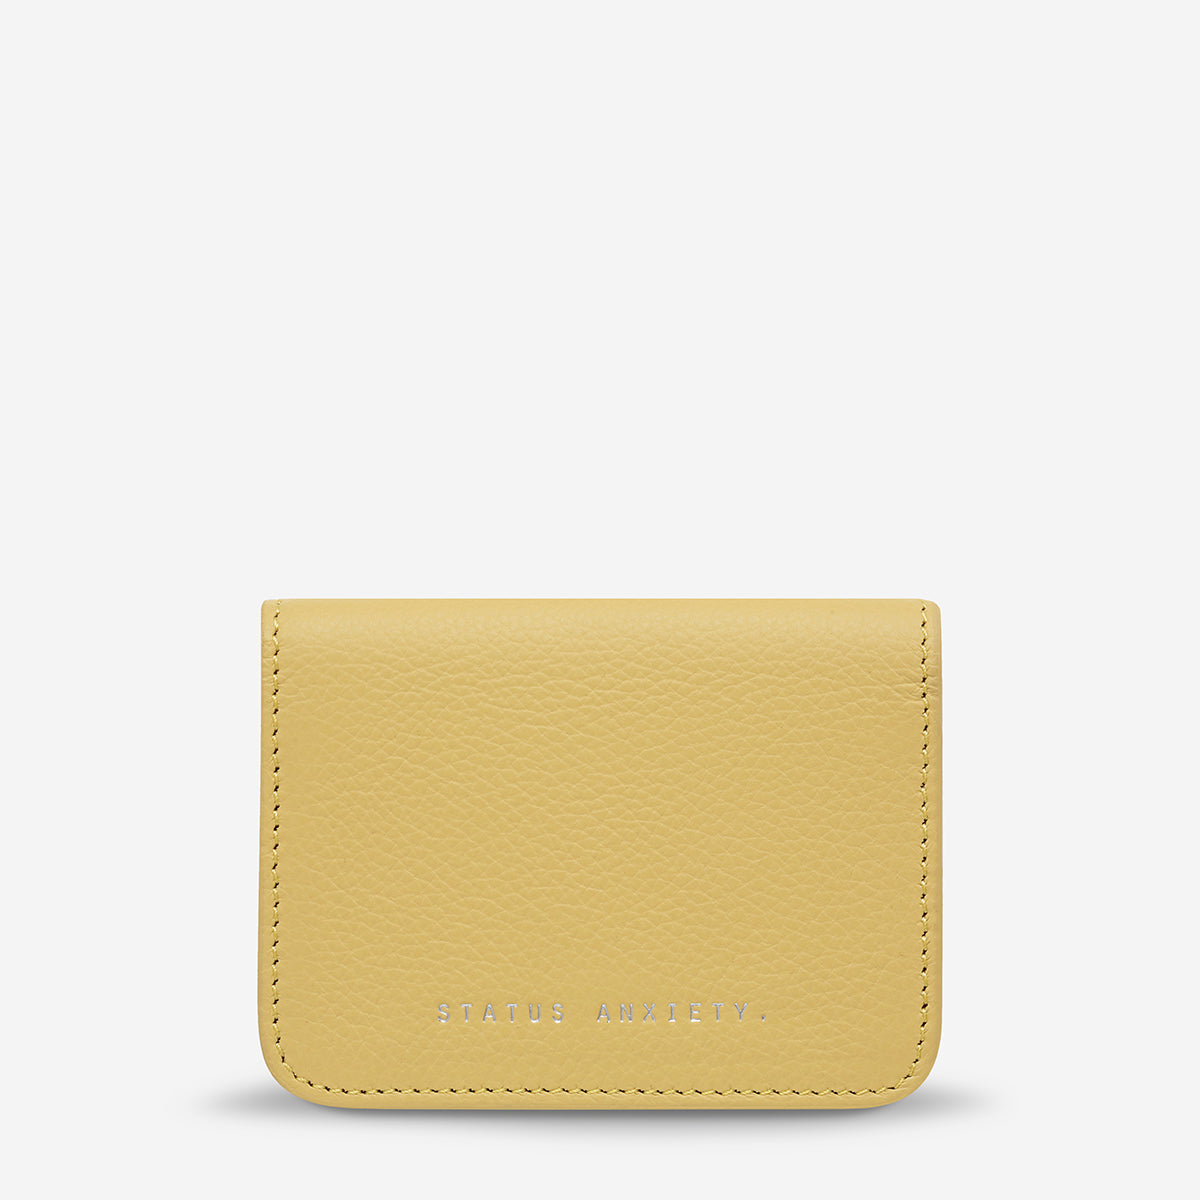 Miles Away Leather Wallet - Buttermilk - Status Anxiety - Mandi at Home